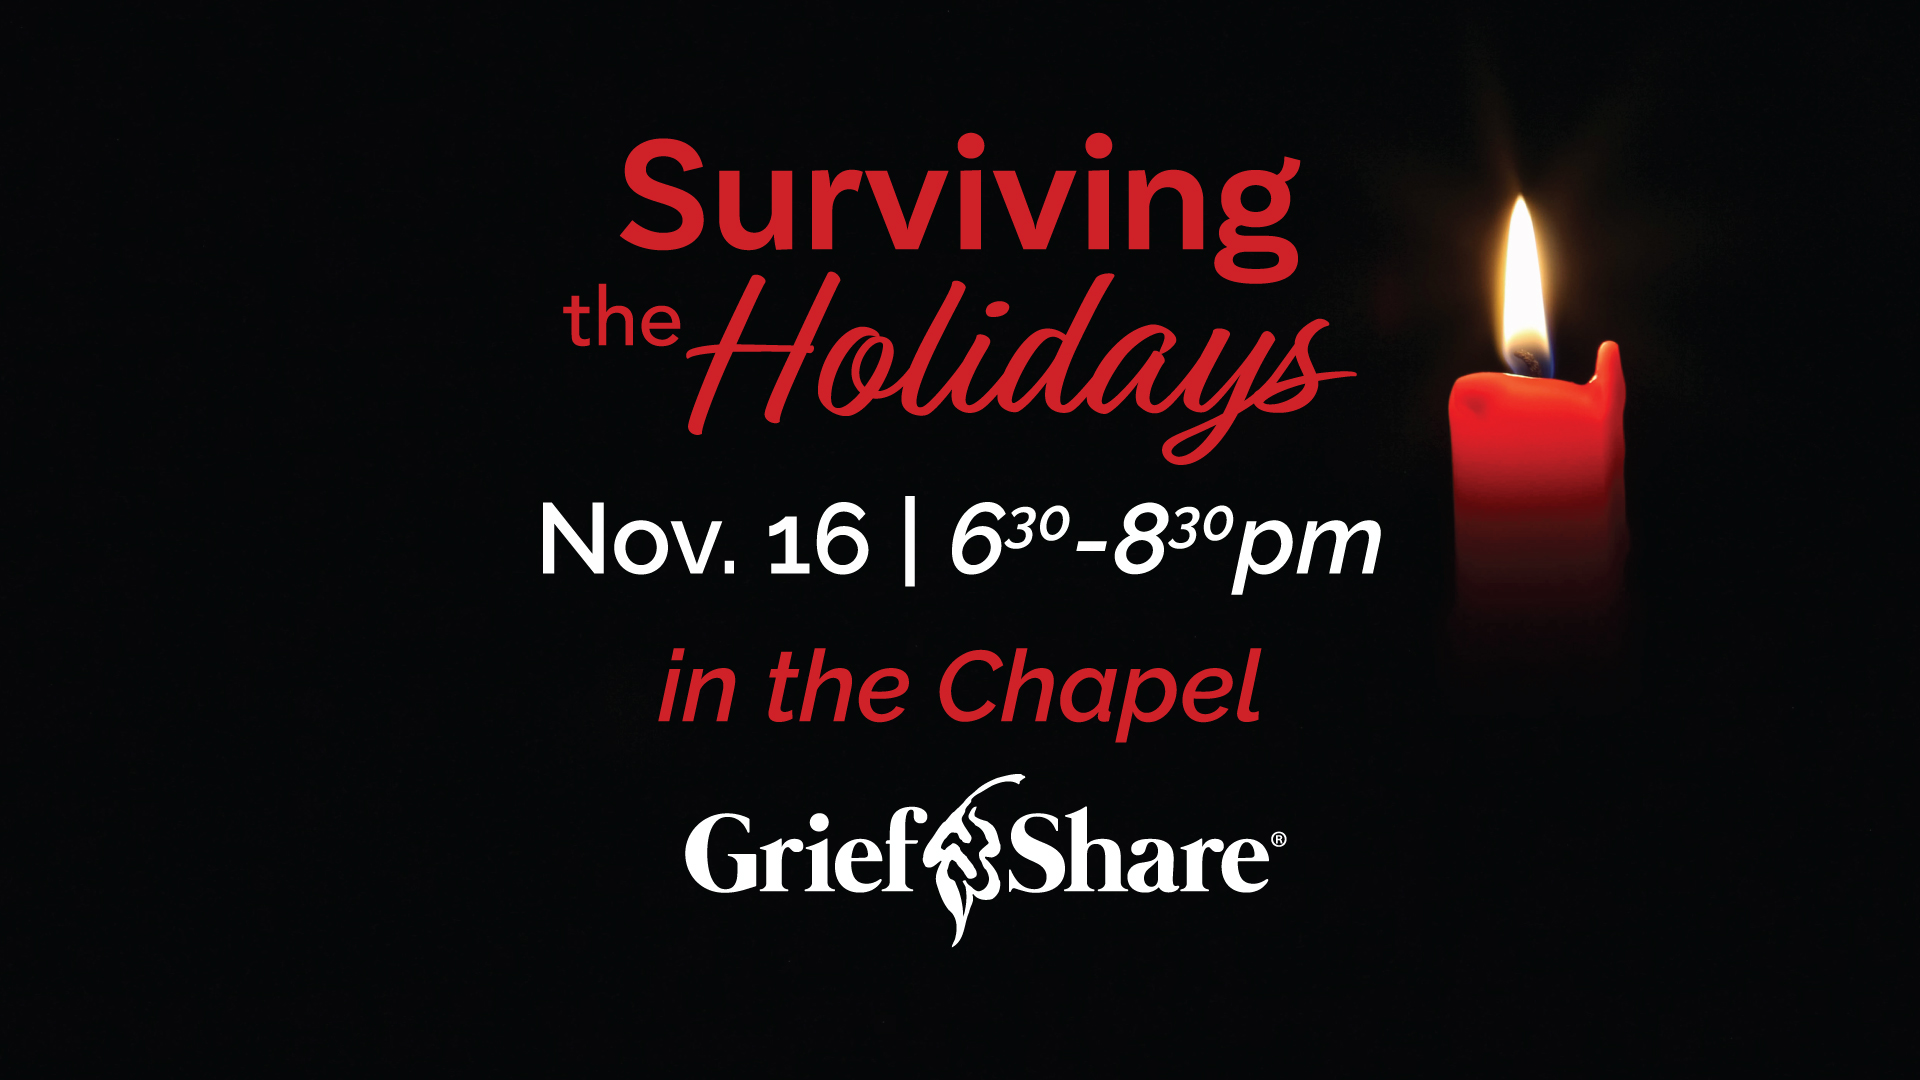 Surviving the Holidays (GriefShare Seminar) | Nov. 16 from 6:30-8:30pm in the Chapel